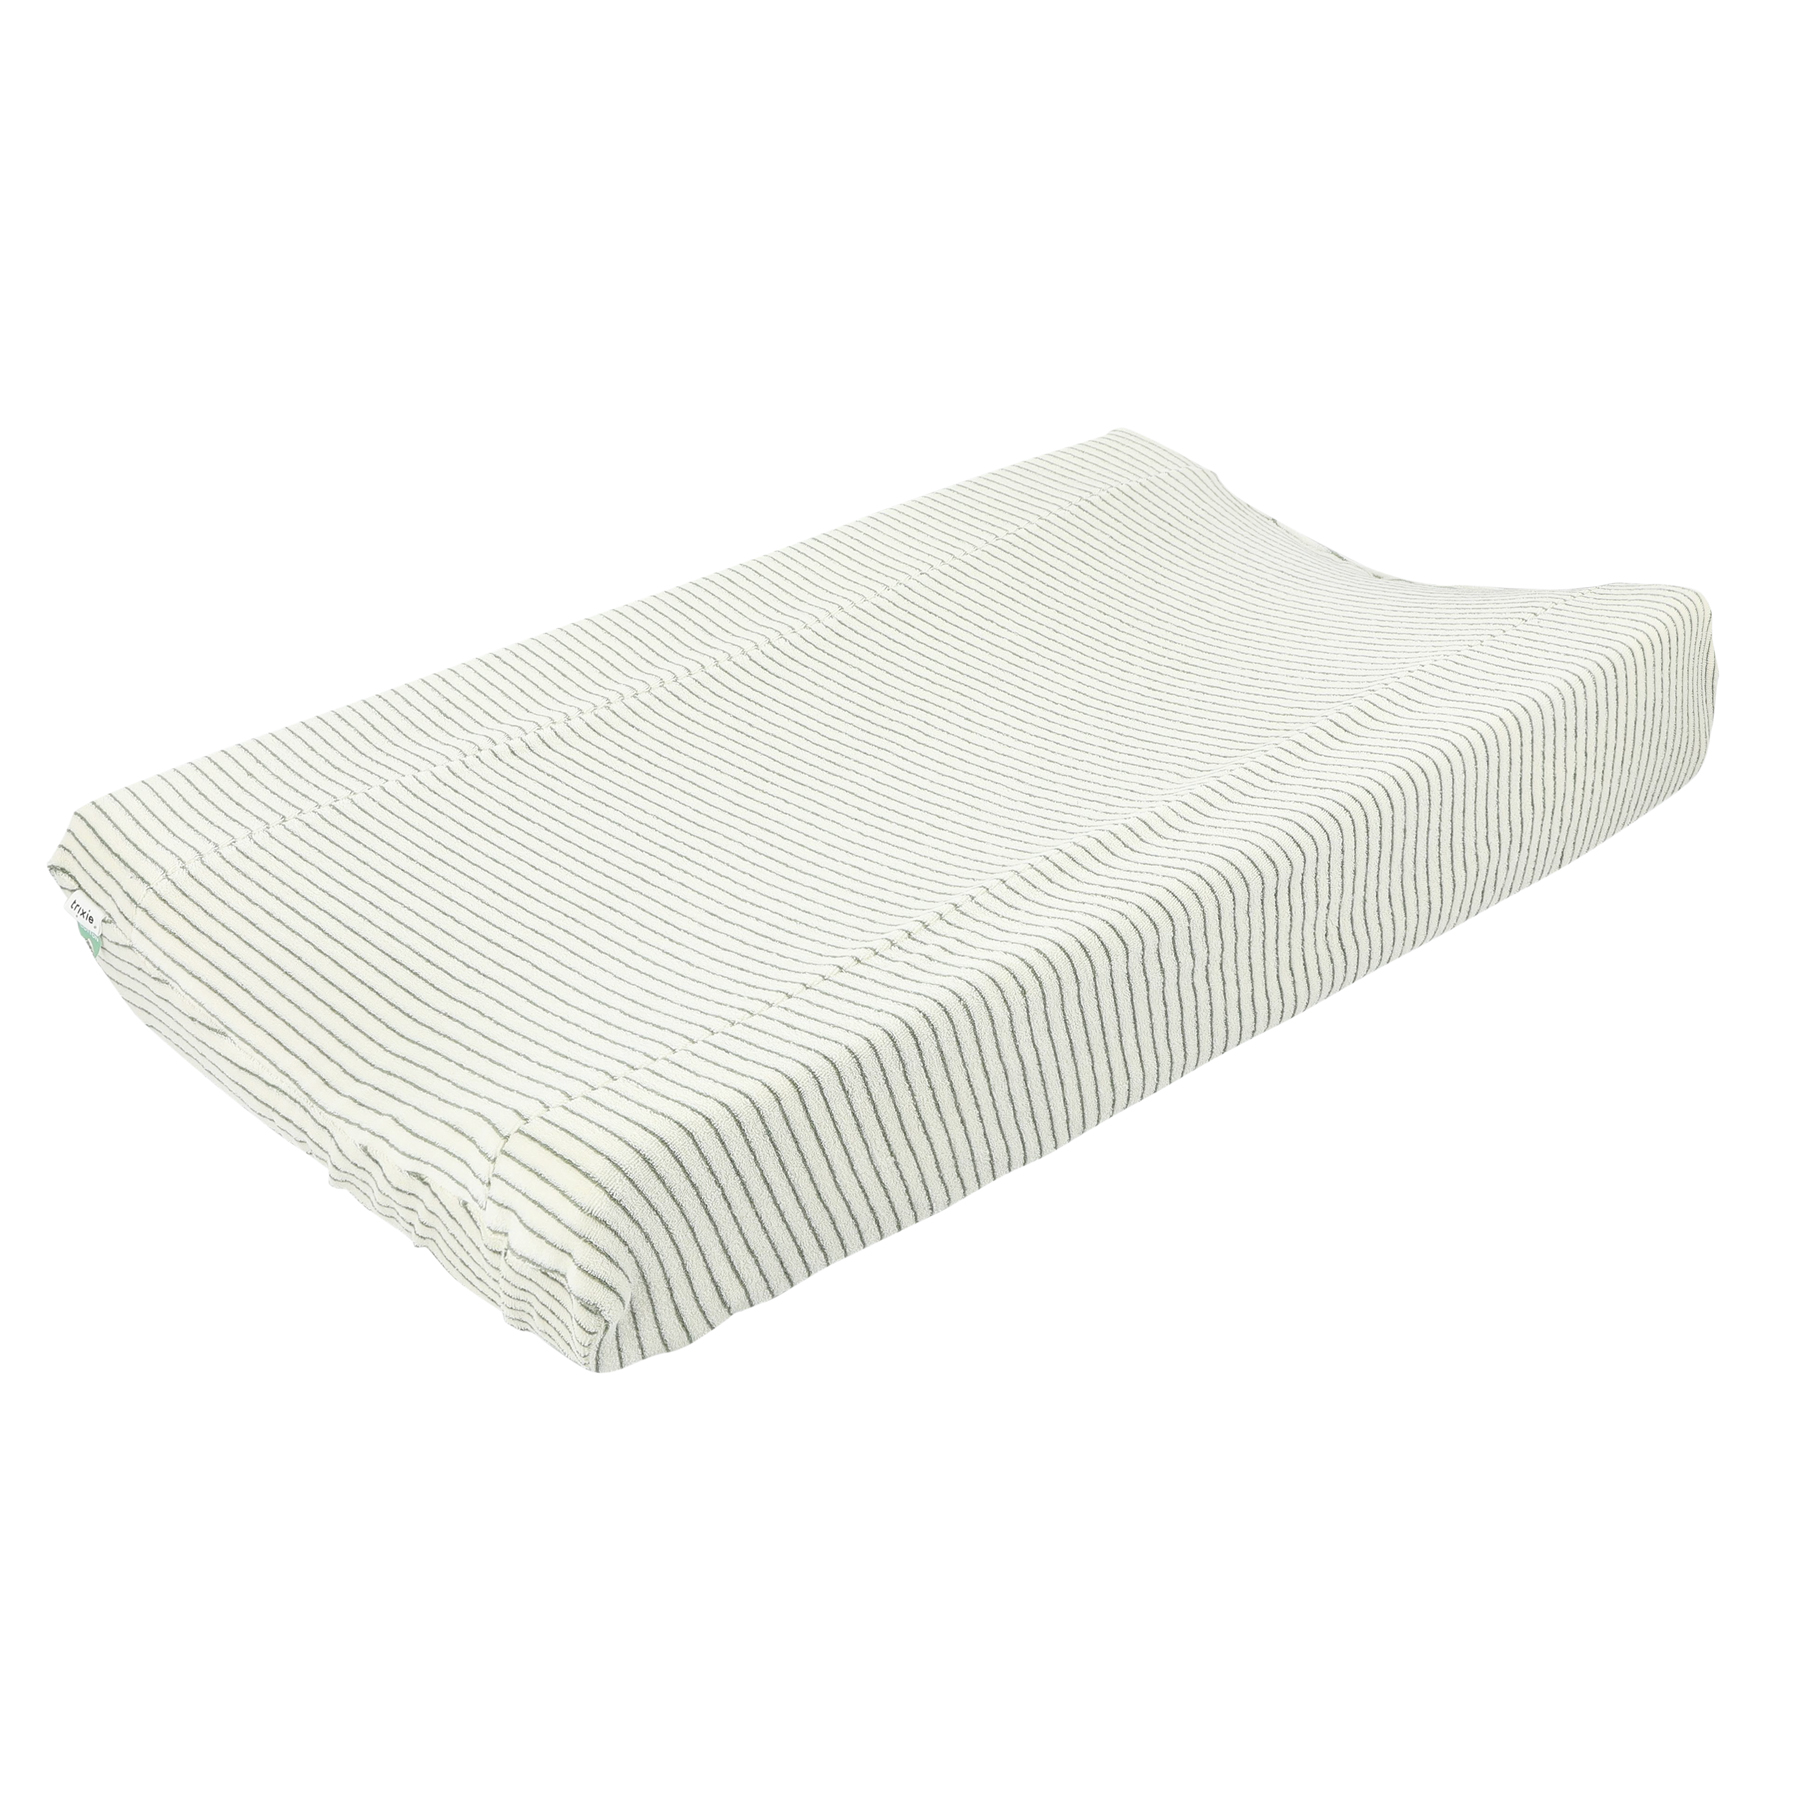 Changing pad cover | 70x45cm - Stripes Olive